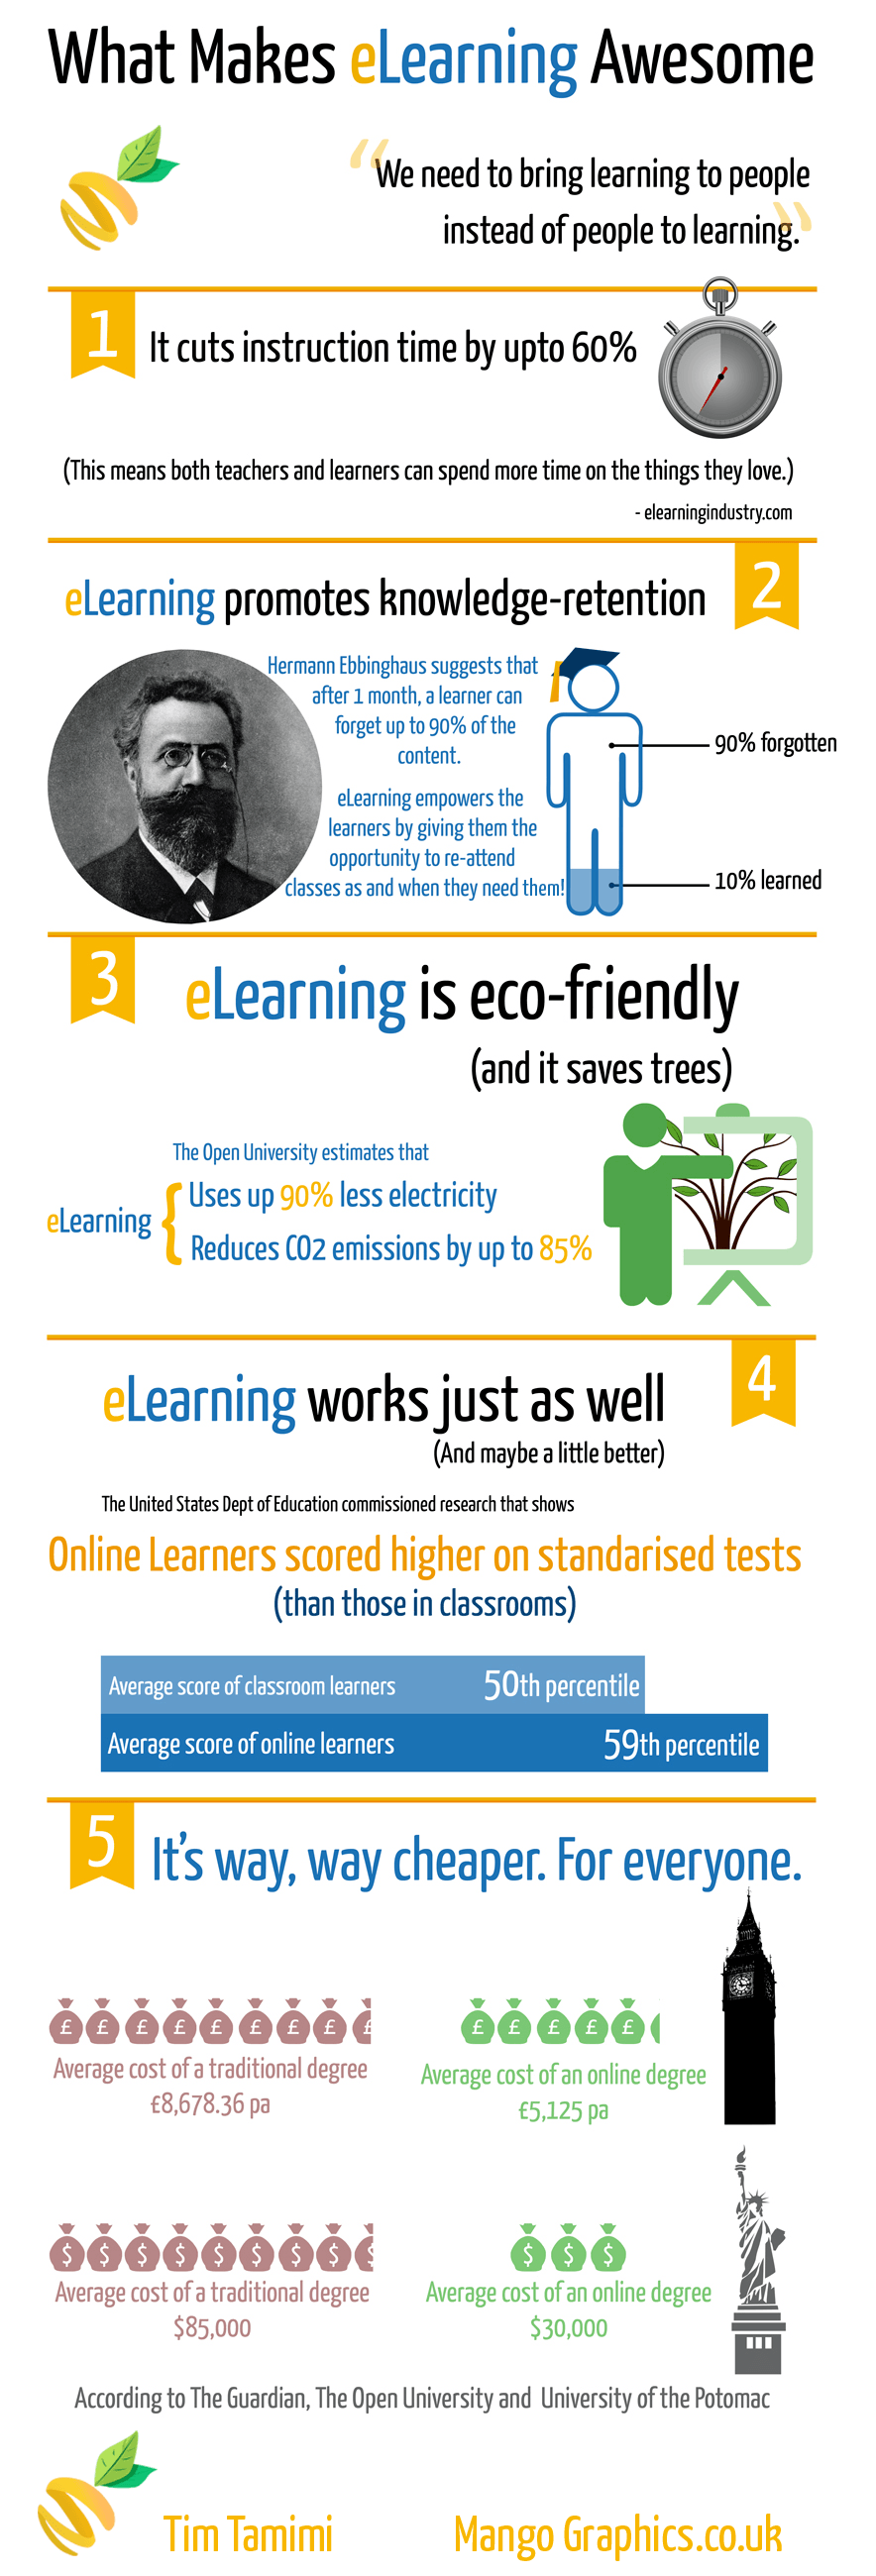 What Makes eLearning Awesome Infographic